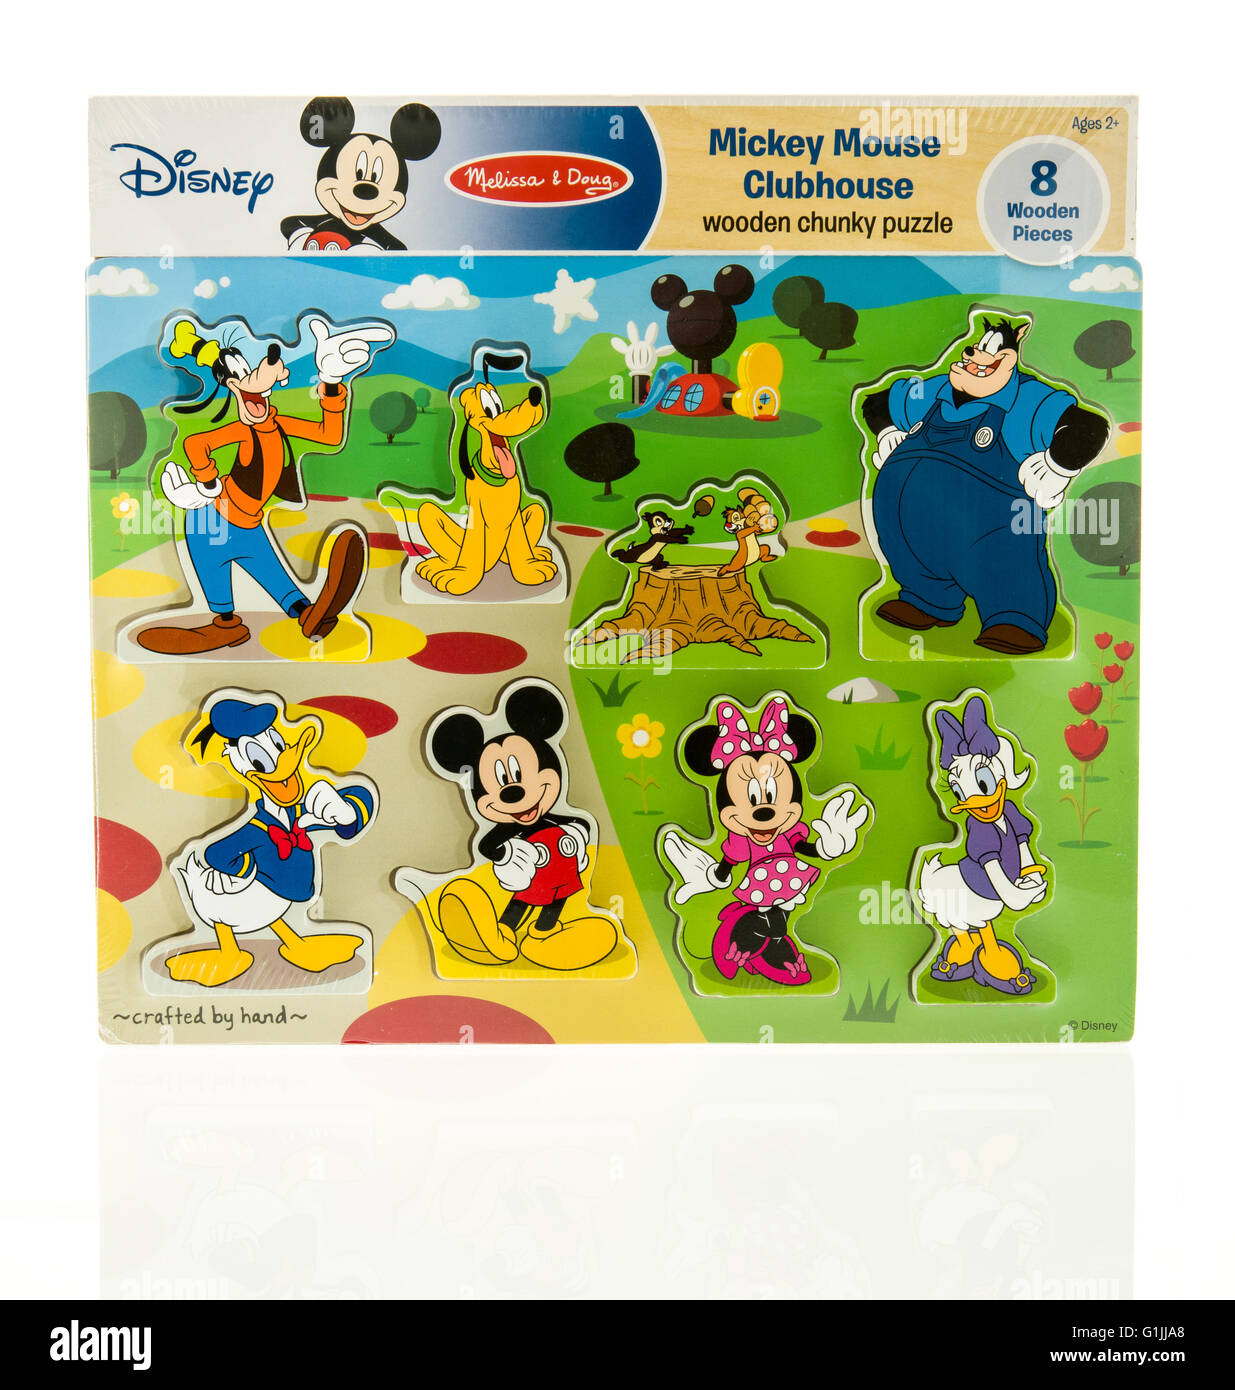 Winneconne, WI - 15 May 2016: Package of a Disney Mickey Mouse clubhouse puzzle on an isolated background Stock Photo